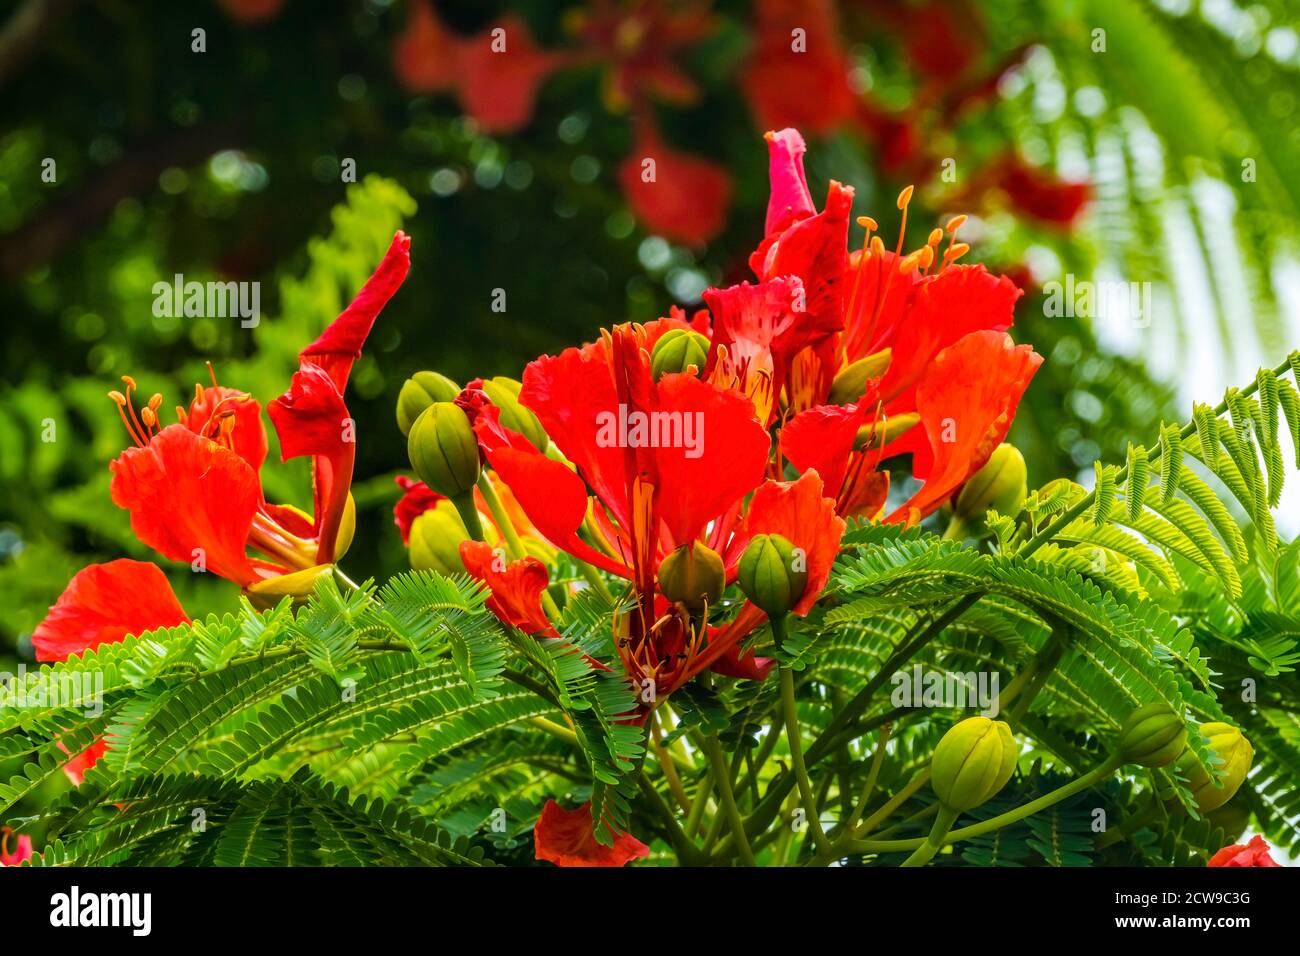 Tropical Red Orange Tropical Flame Tree Flowers Green Leaves Easter Island Chile.  Native to Madagascar Stock Photo - Alamy